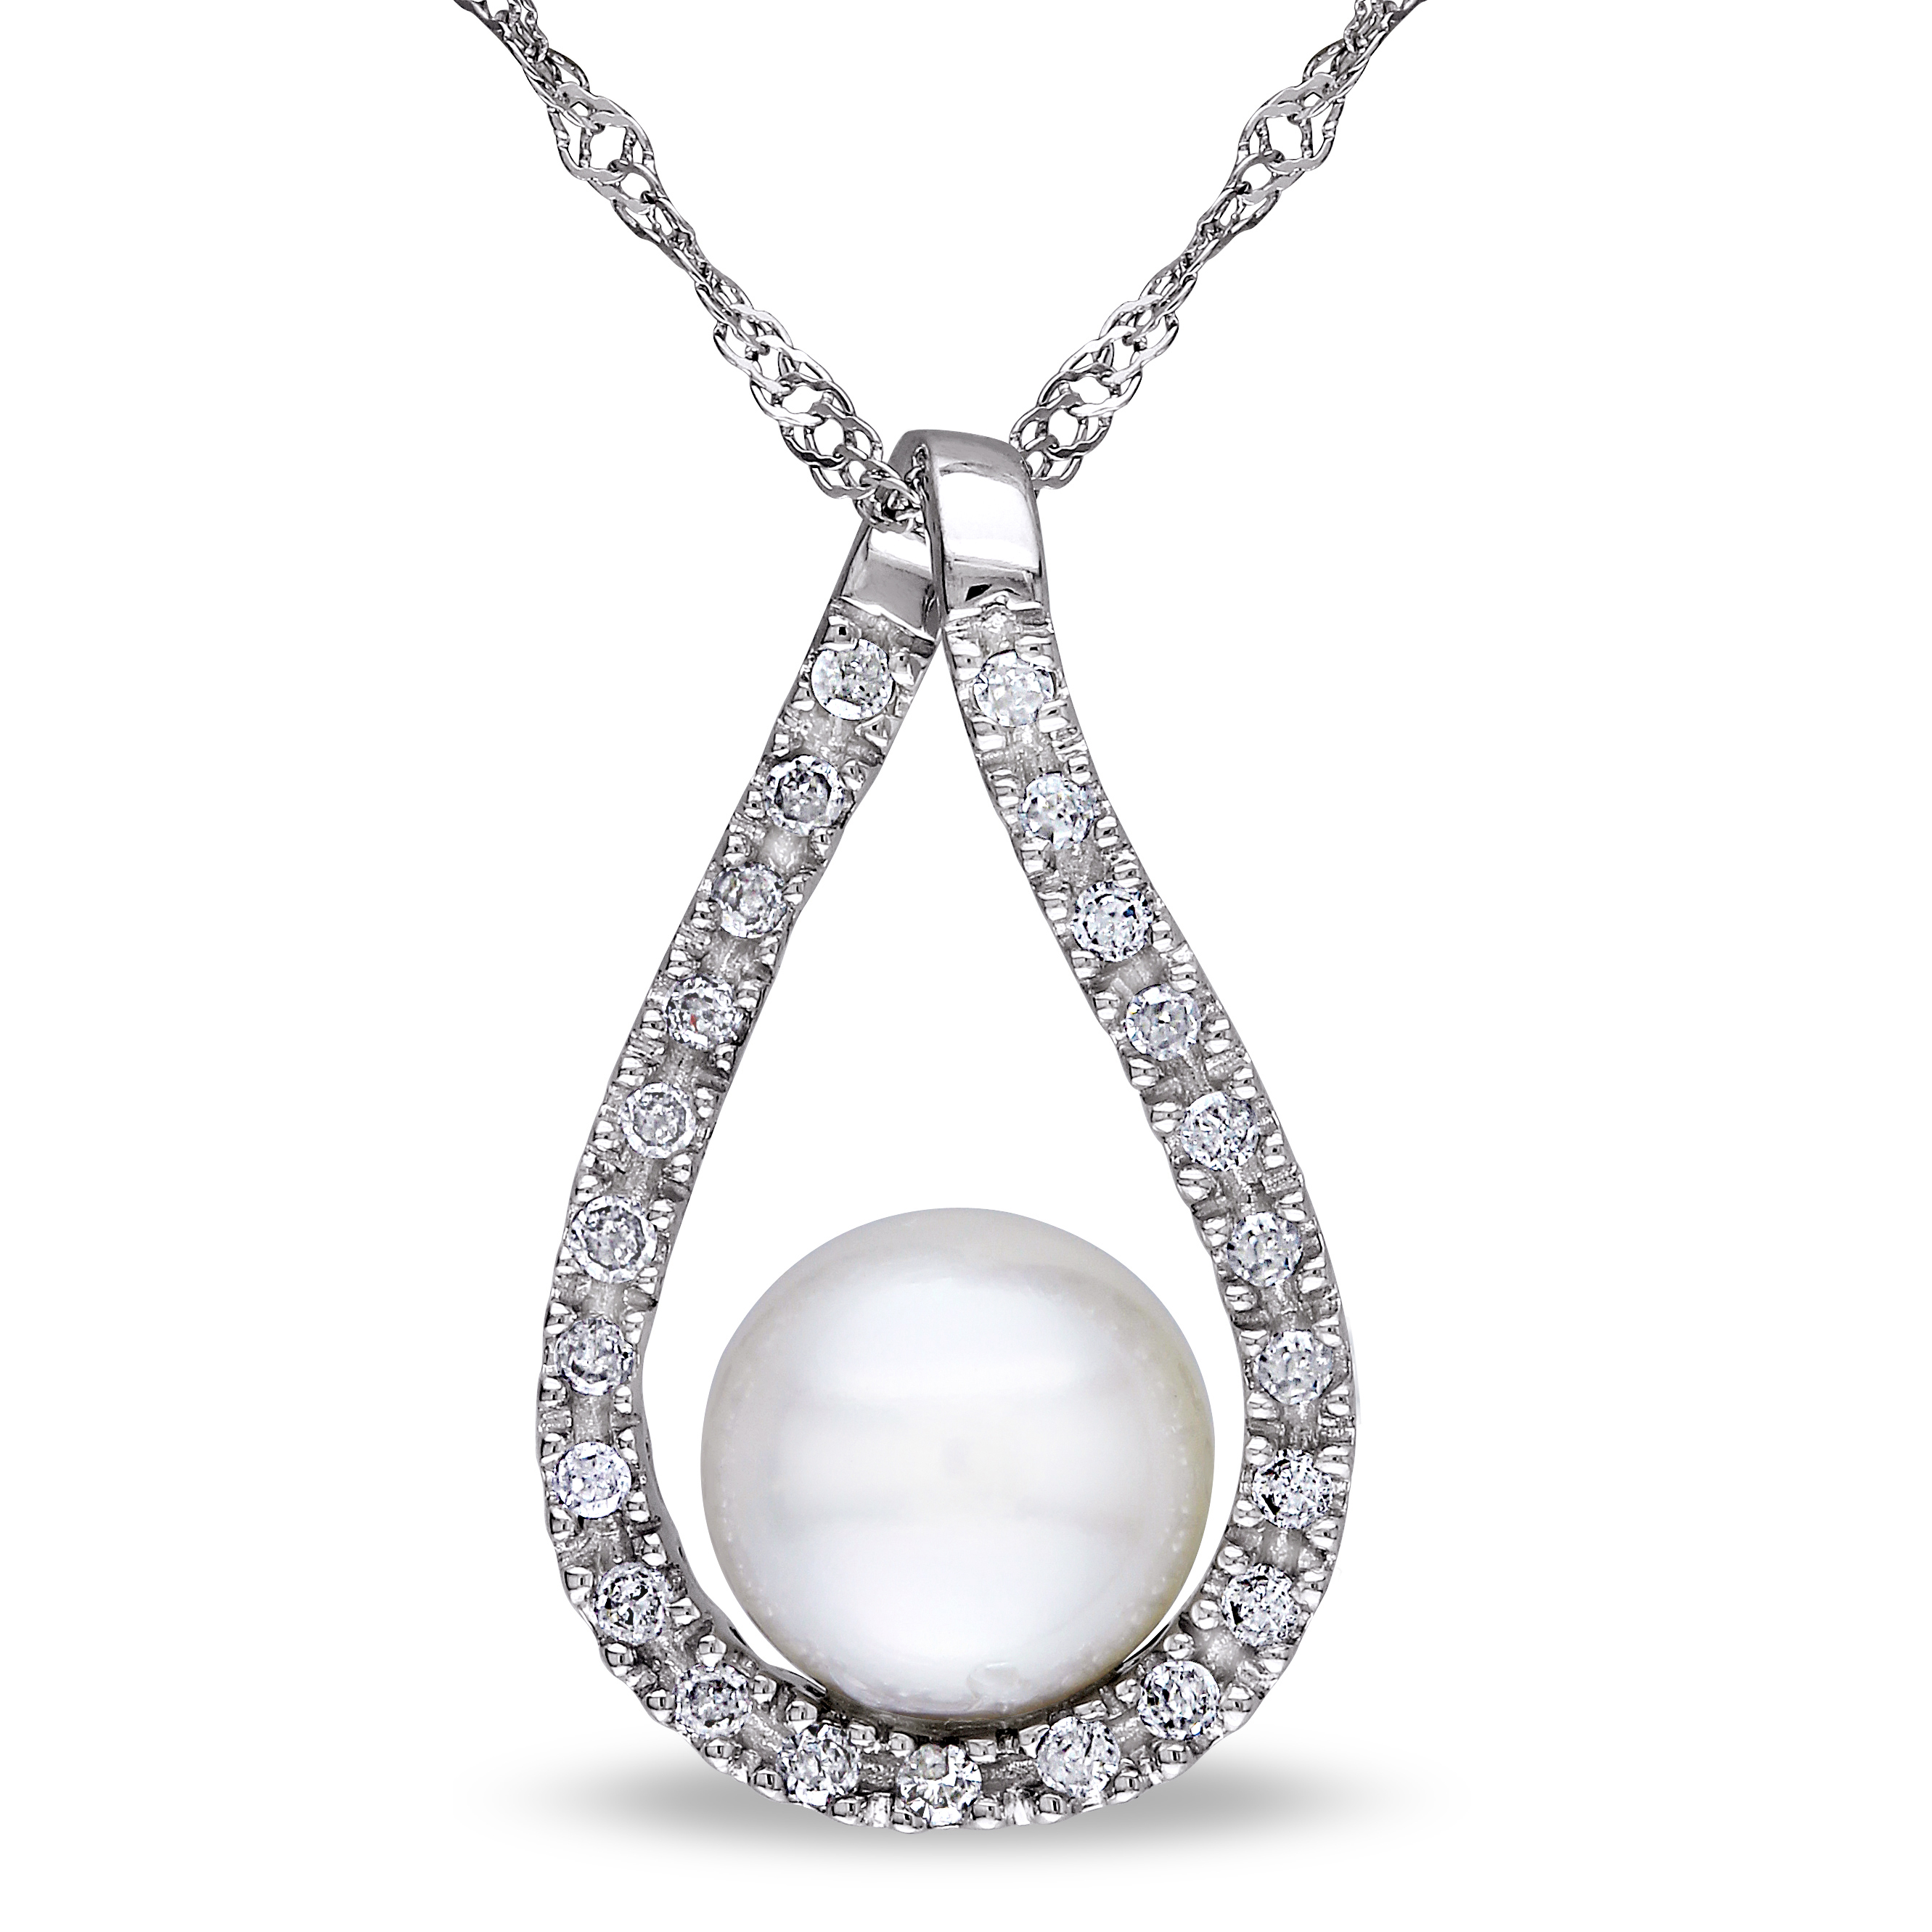 6.5 - 7 MM Cultured Freshwater Pearl and 1/10 CT TW Diamond Raindrop Pendant with Chain in 14k White Gold